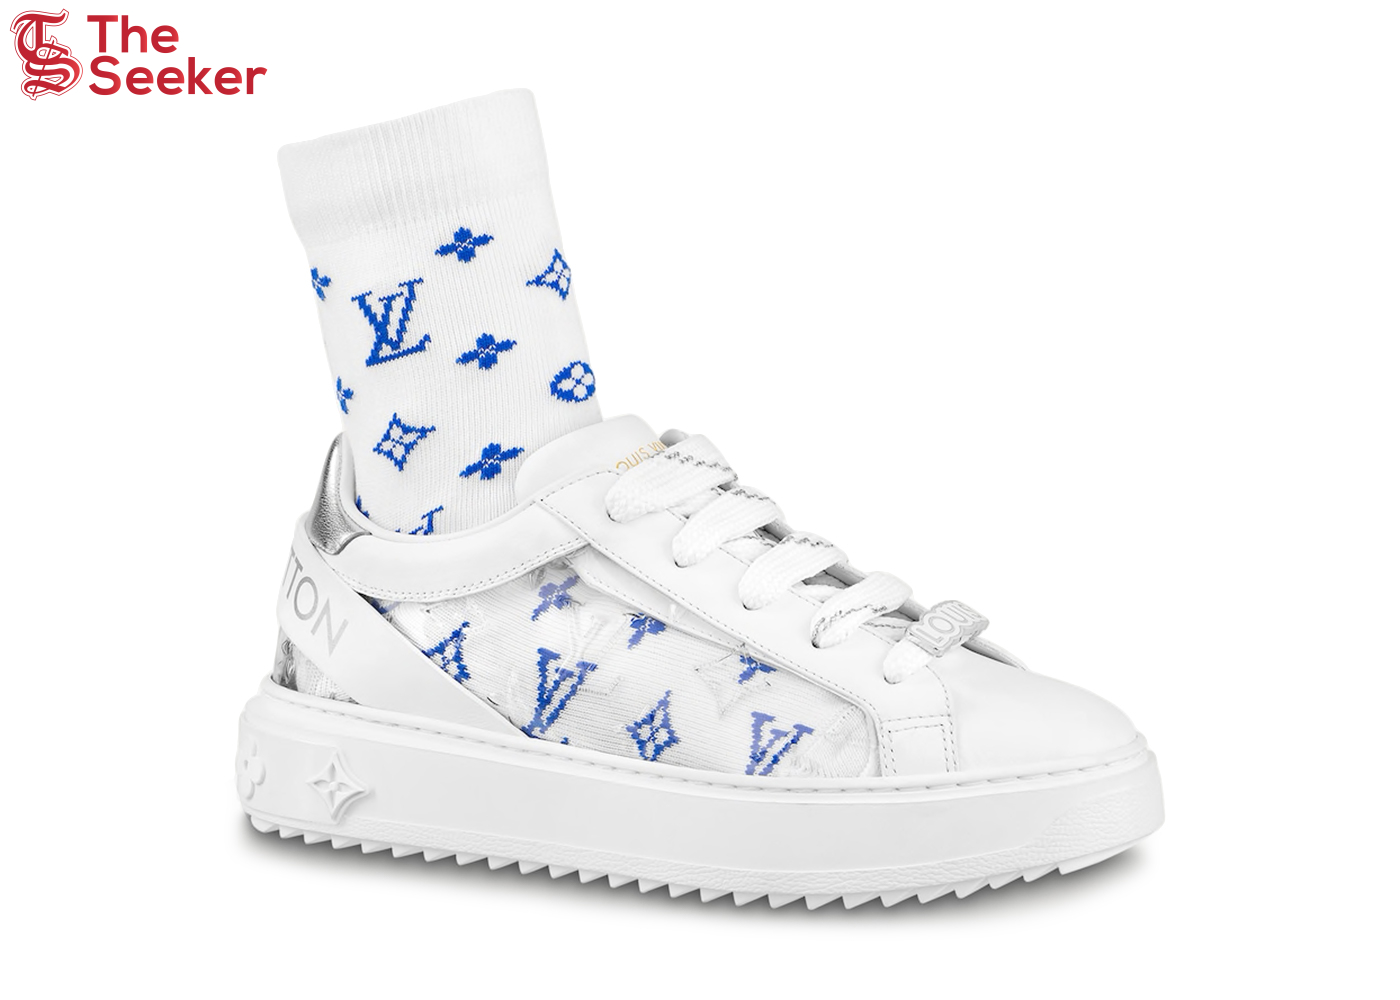 Louis Vuitton Time Out Debossed Monogram Transparent Upper White Silver (Women's) (White Blue Socks Included)